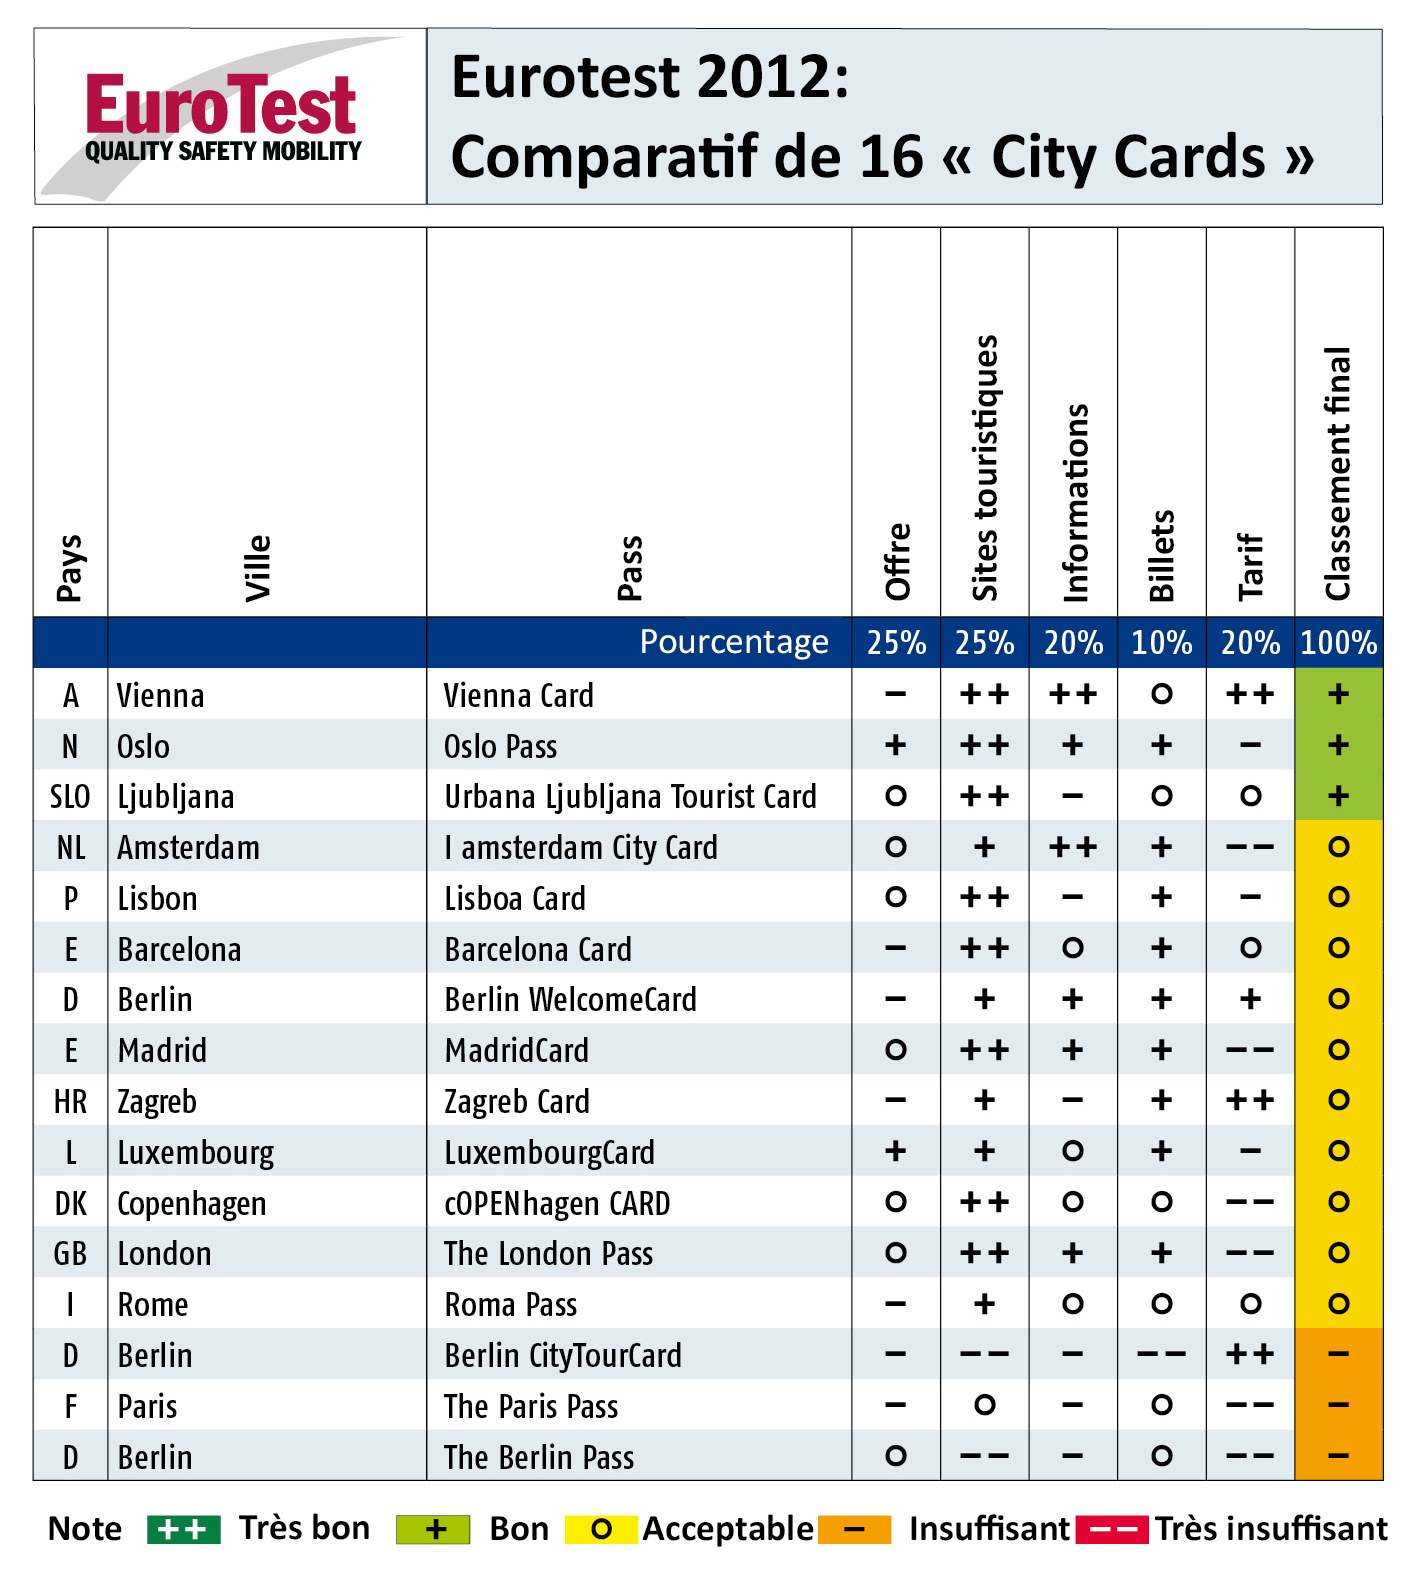 Eurotest - City Cards - Classement